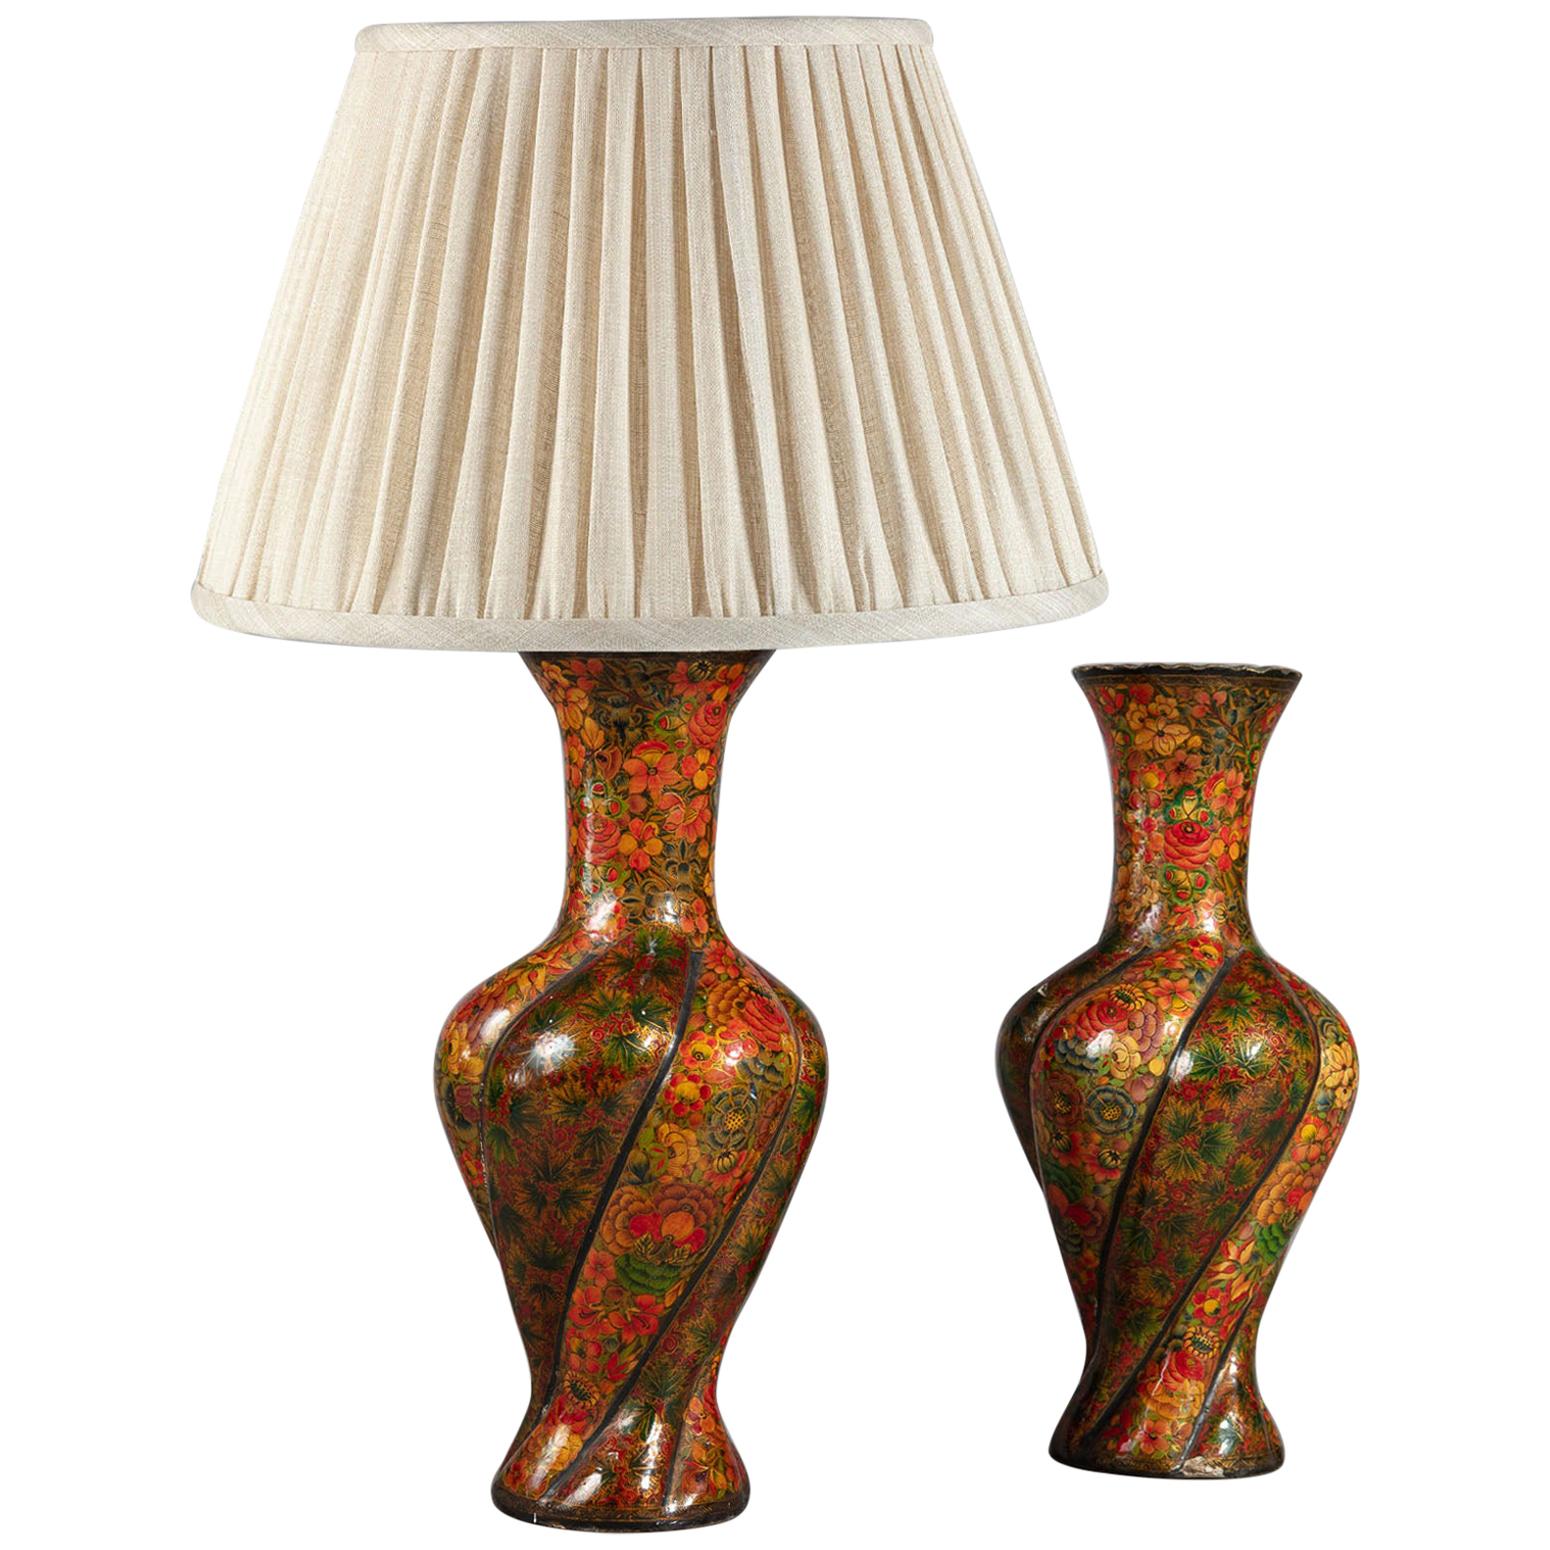 Pair of 20th Century Kashmiri Lacquer Vases as Table Lamps